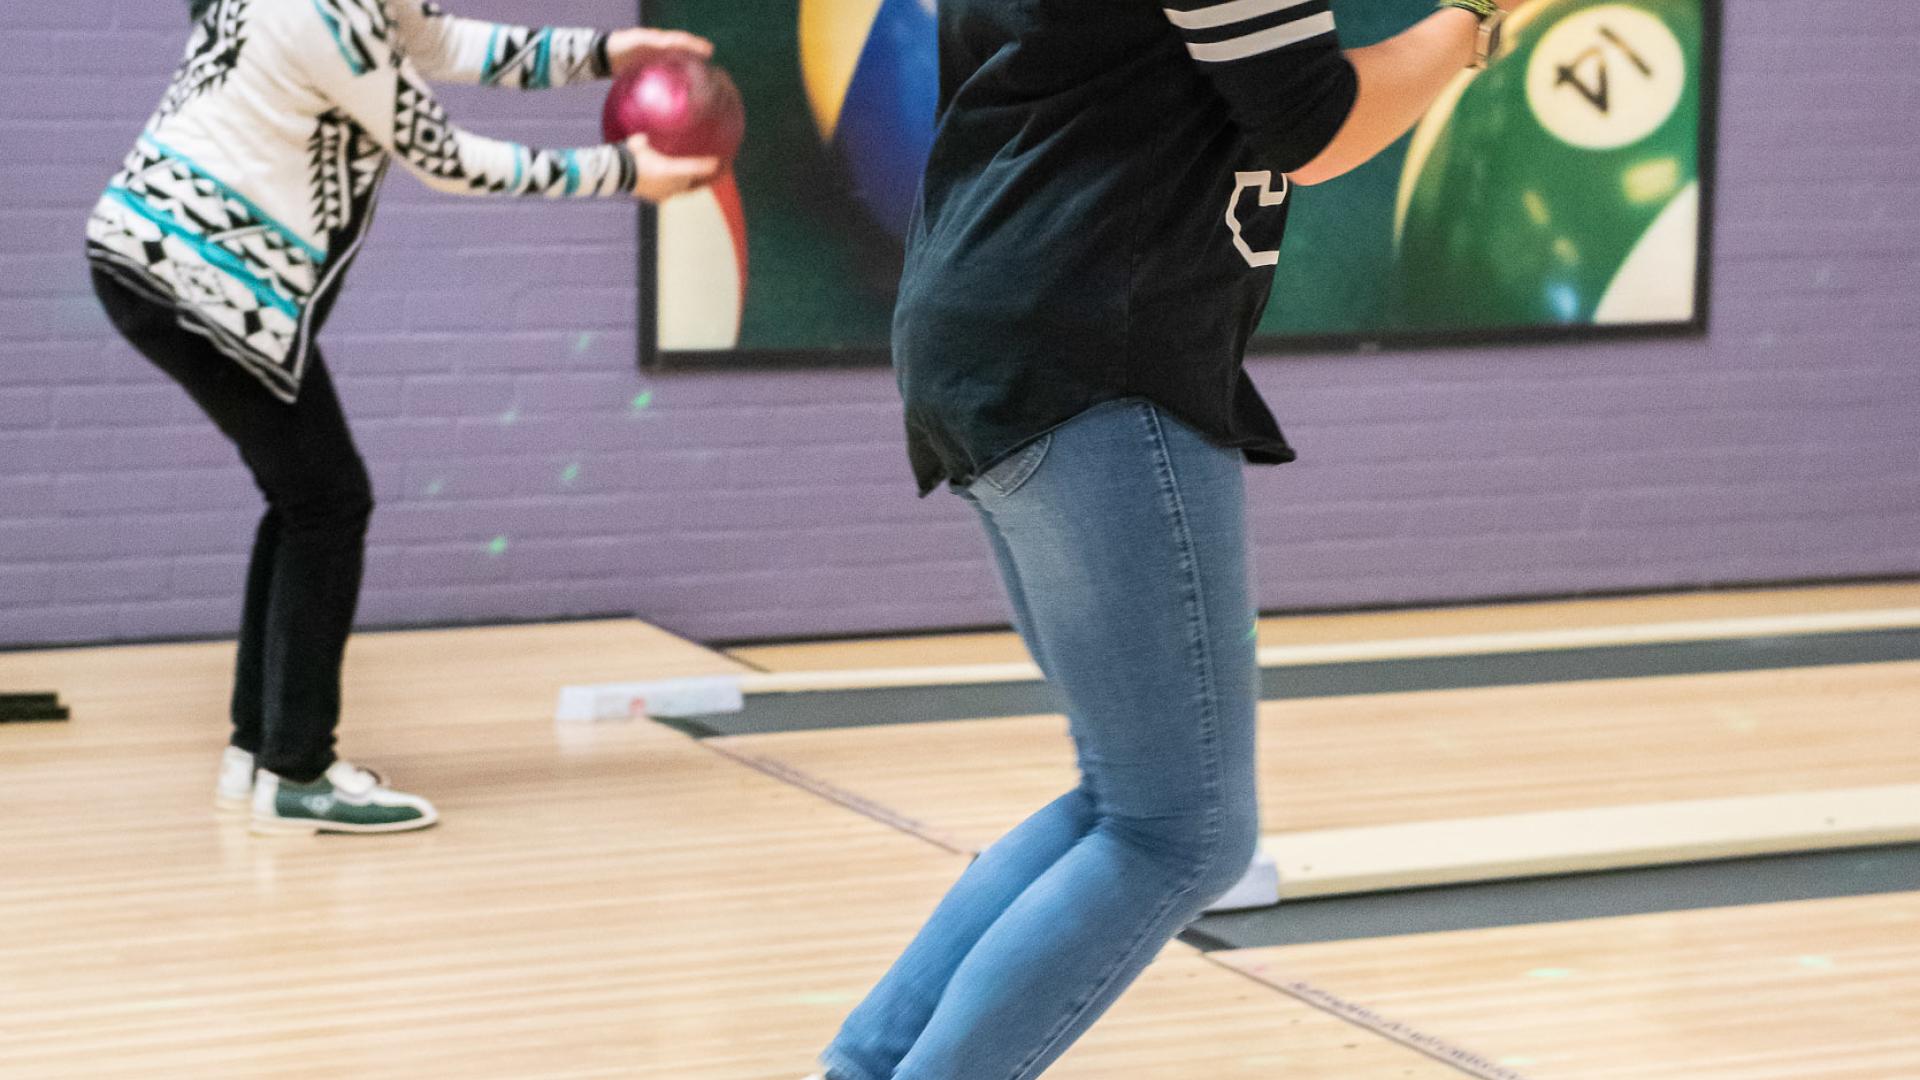 Business Honors Social Night October 18th 2018 Bowling student jumping